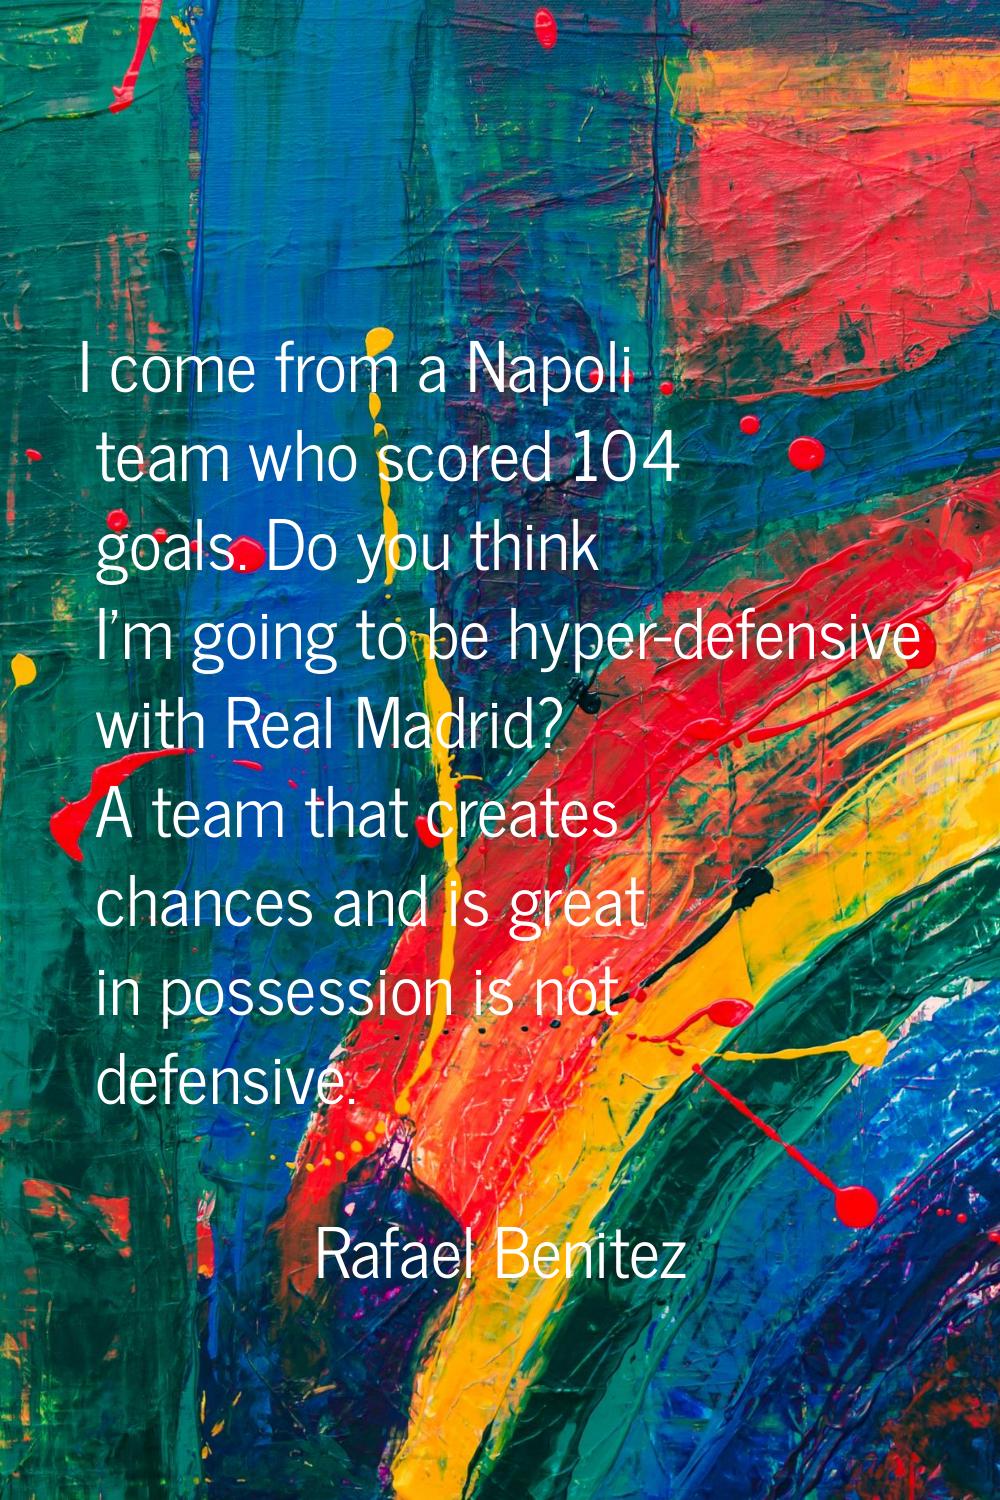 I come from a Napoli team who scored 104 goals. Do you think I'm going to be hyper-defensive with R